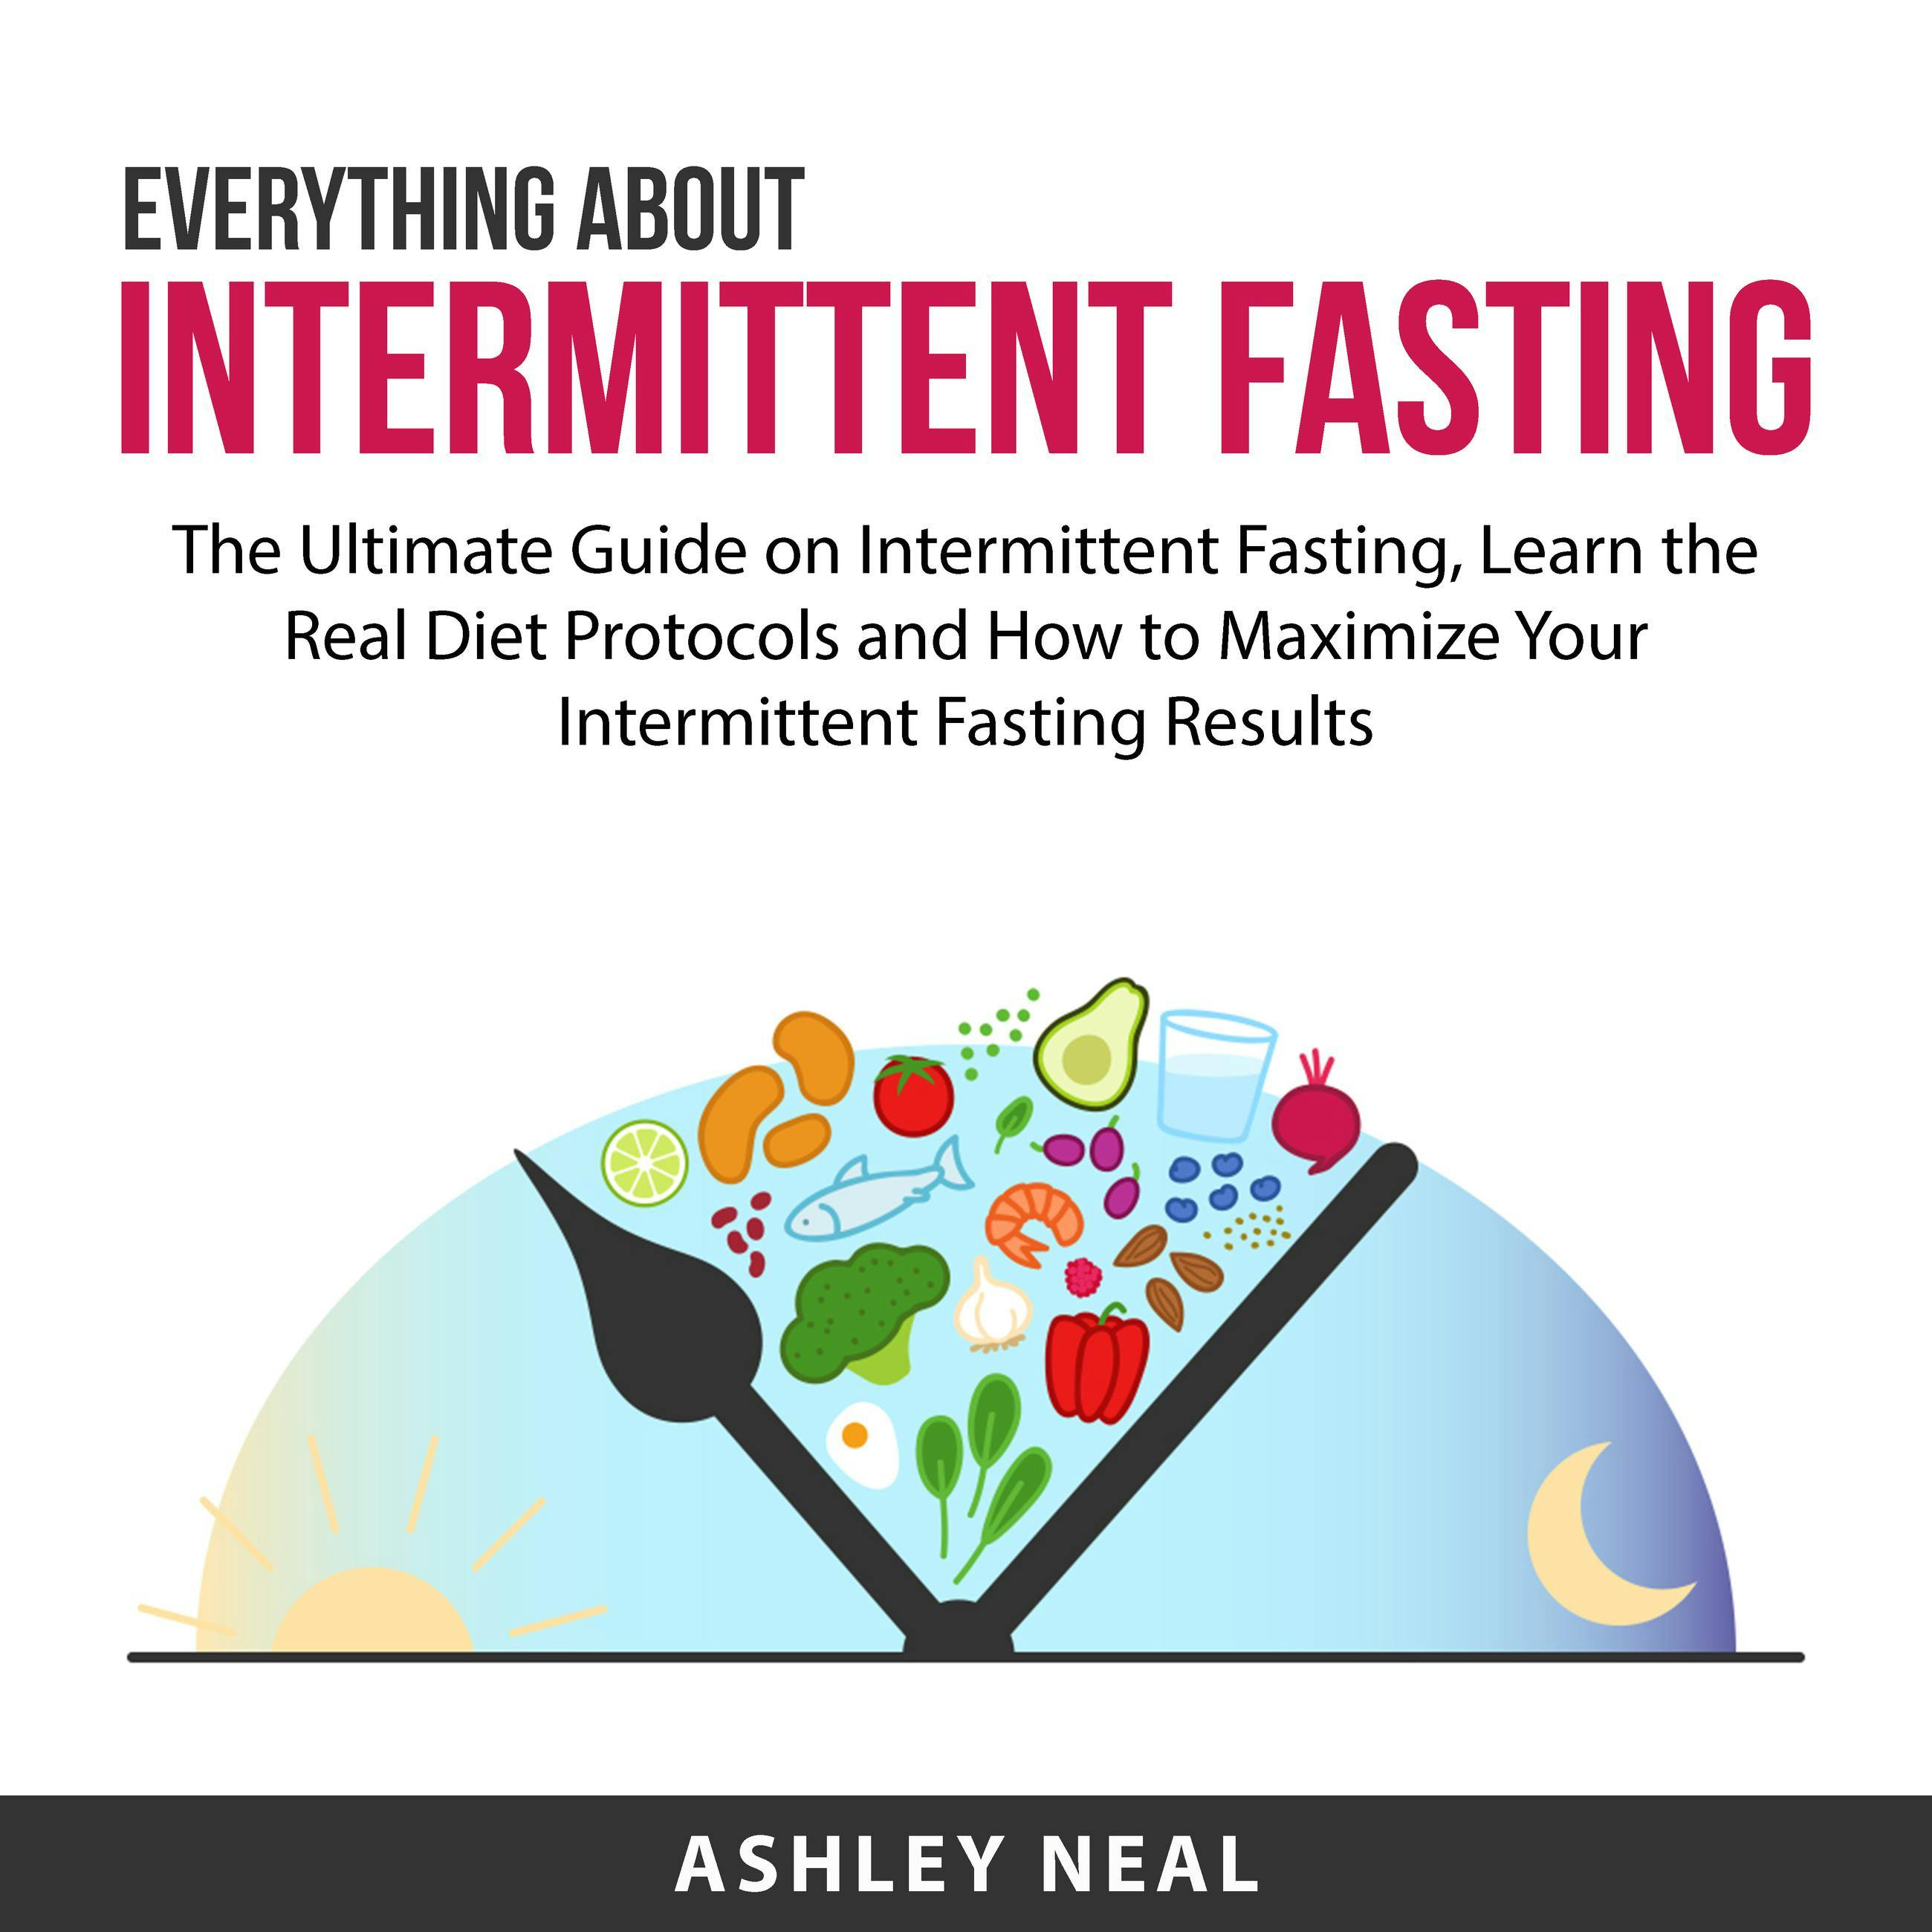 Everything About Intermittent Fasting: The Ultimate Guide on Intermittent Fasting, Learn the Real Diet Protocols and How to Maximize Your Intermittent Fasting Results - Ashley Neal